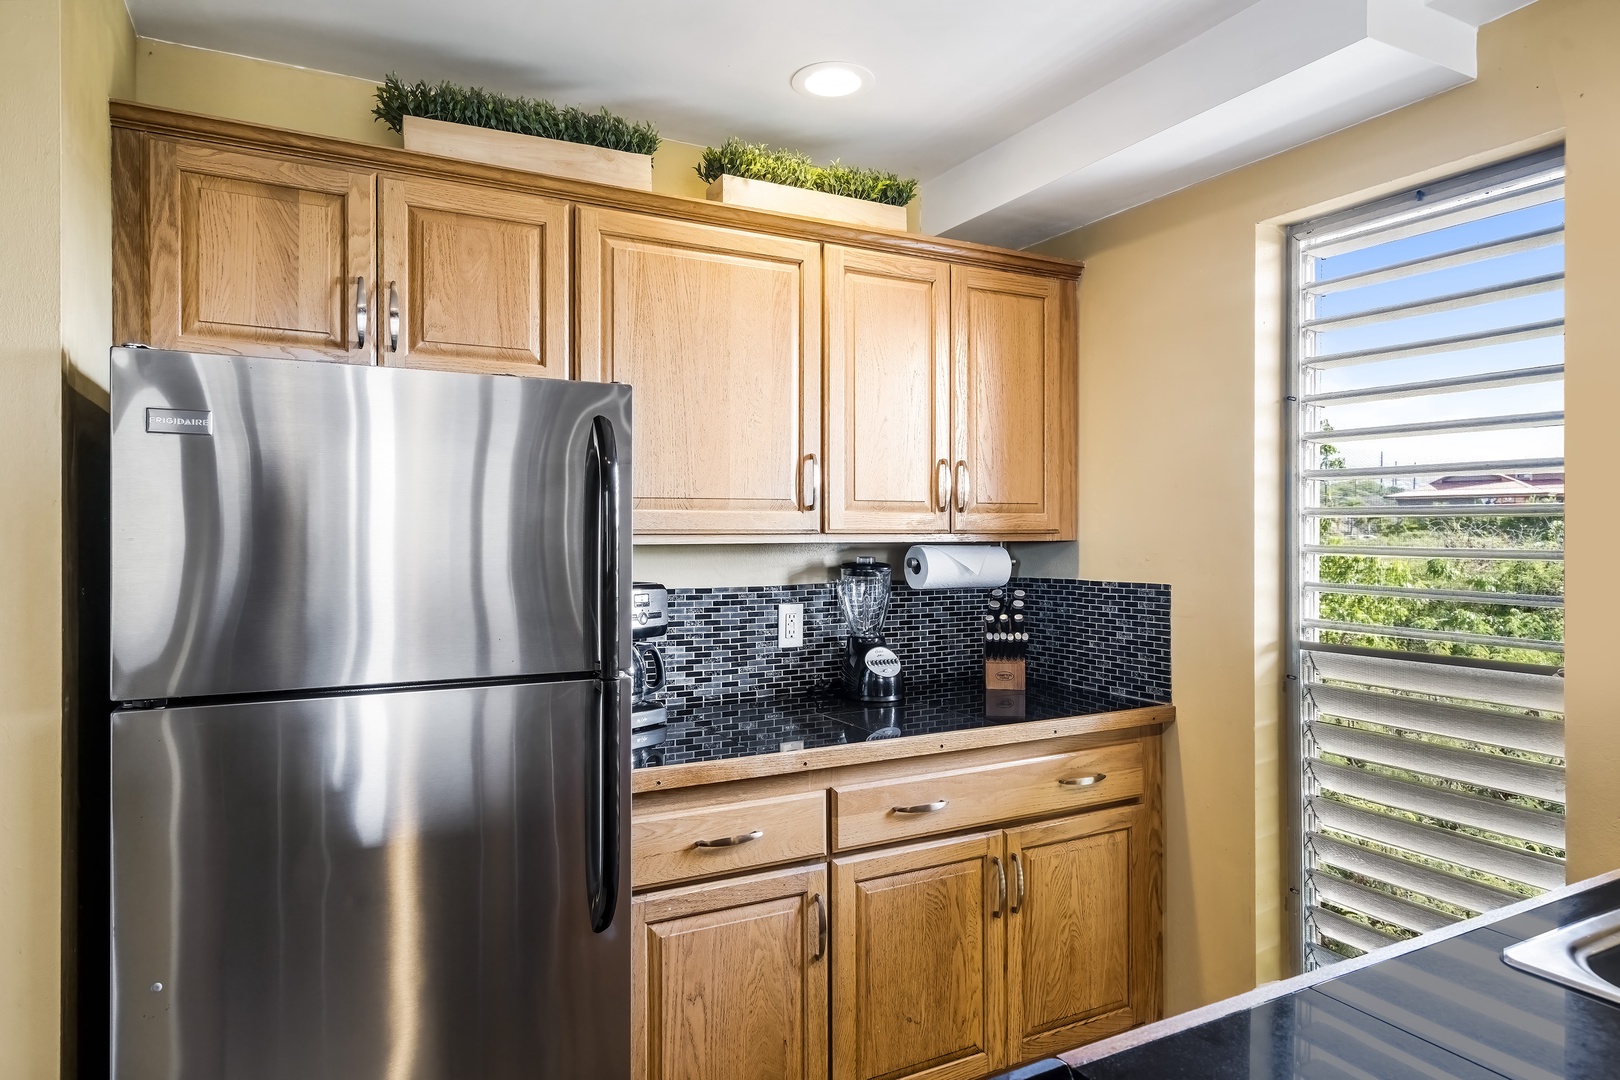 Kailua-Kona Vacation Rentals, Kona Mansions D231 - Upgraded kitchen with Stainless appliances